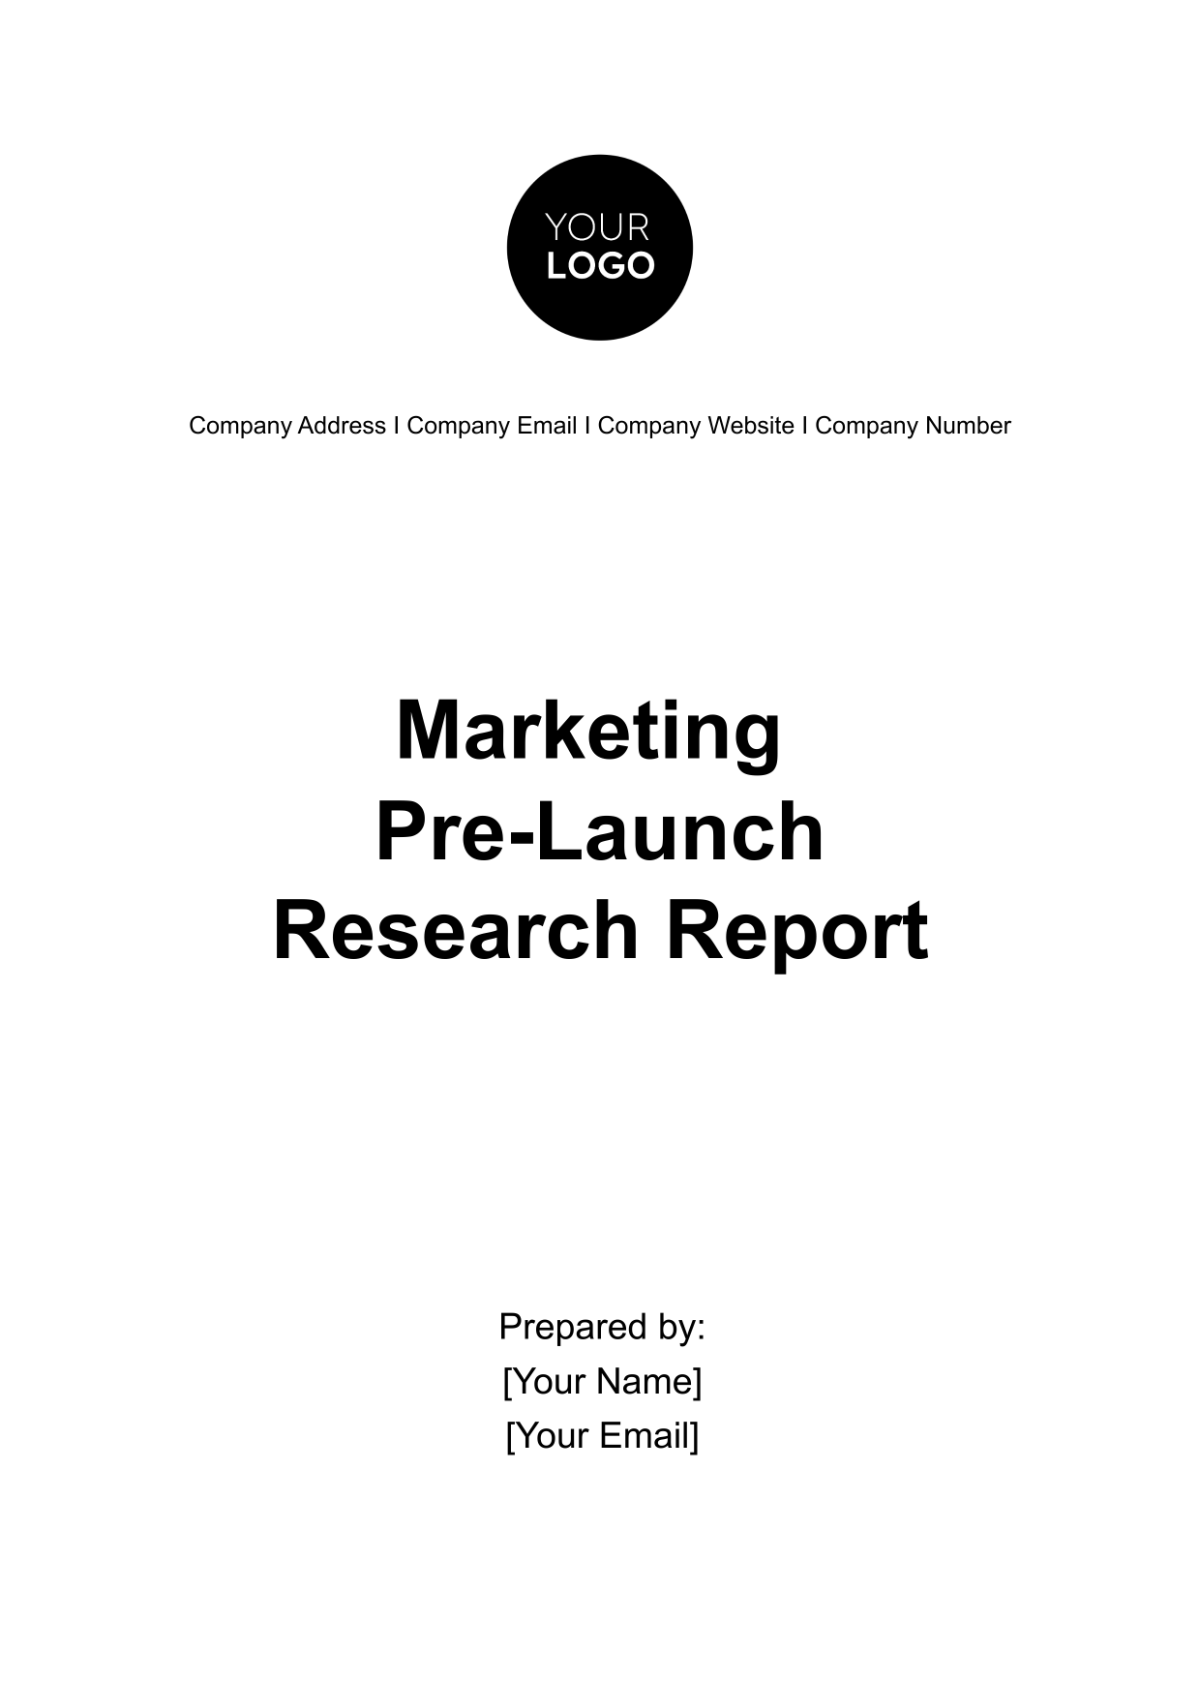 Marketing Pre-Launch Research Report Template